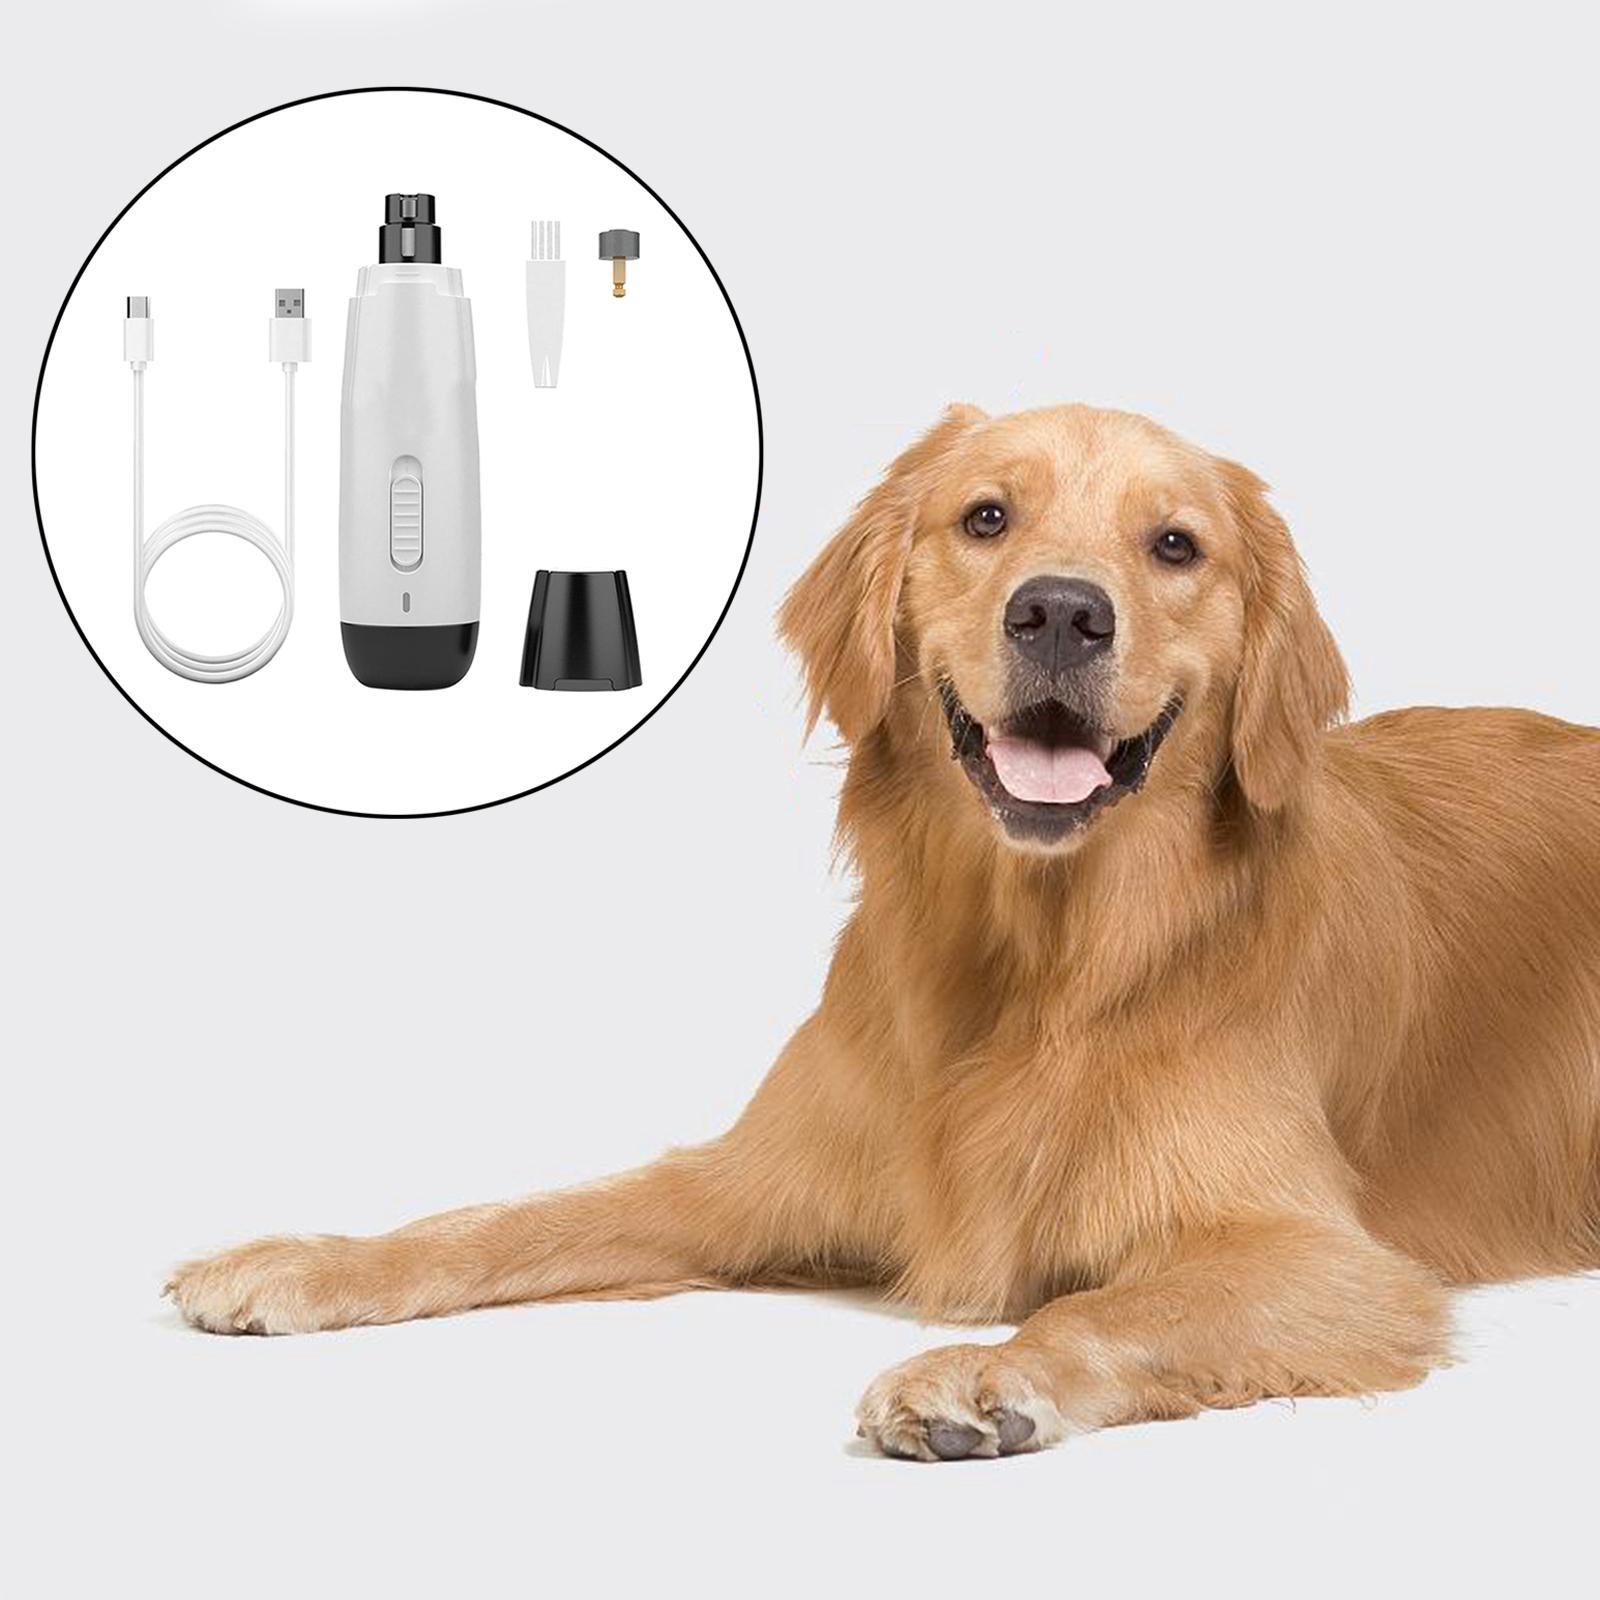 Pet Dog Cat Nail Trimmer Grooming Tool Care Grinder Electric Clipper Kit